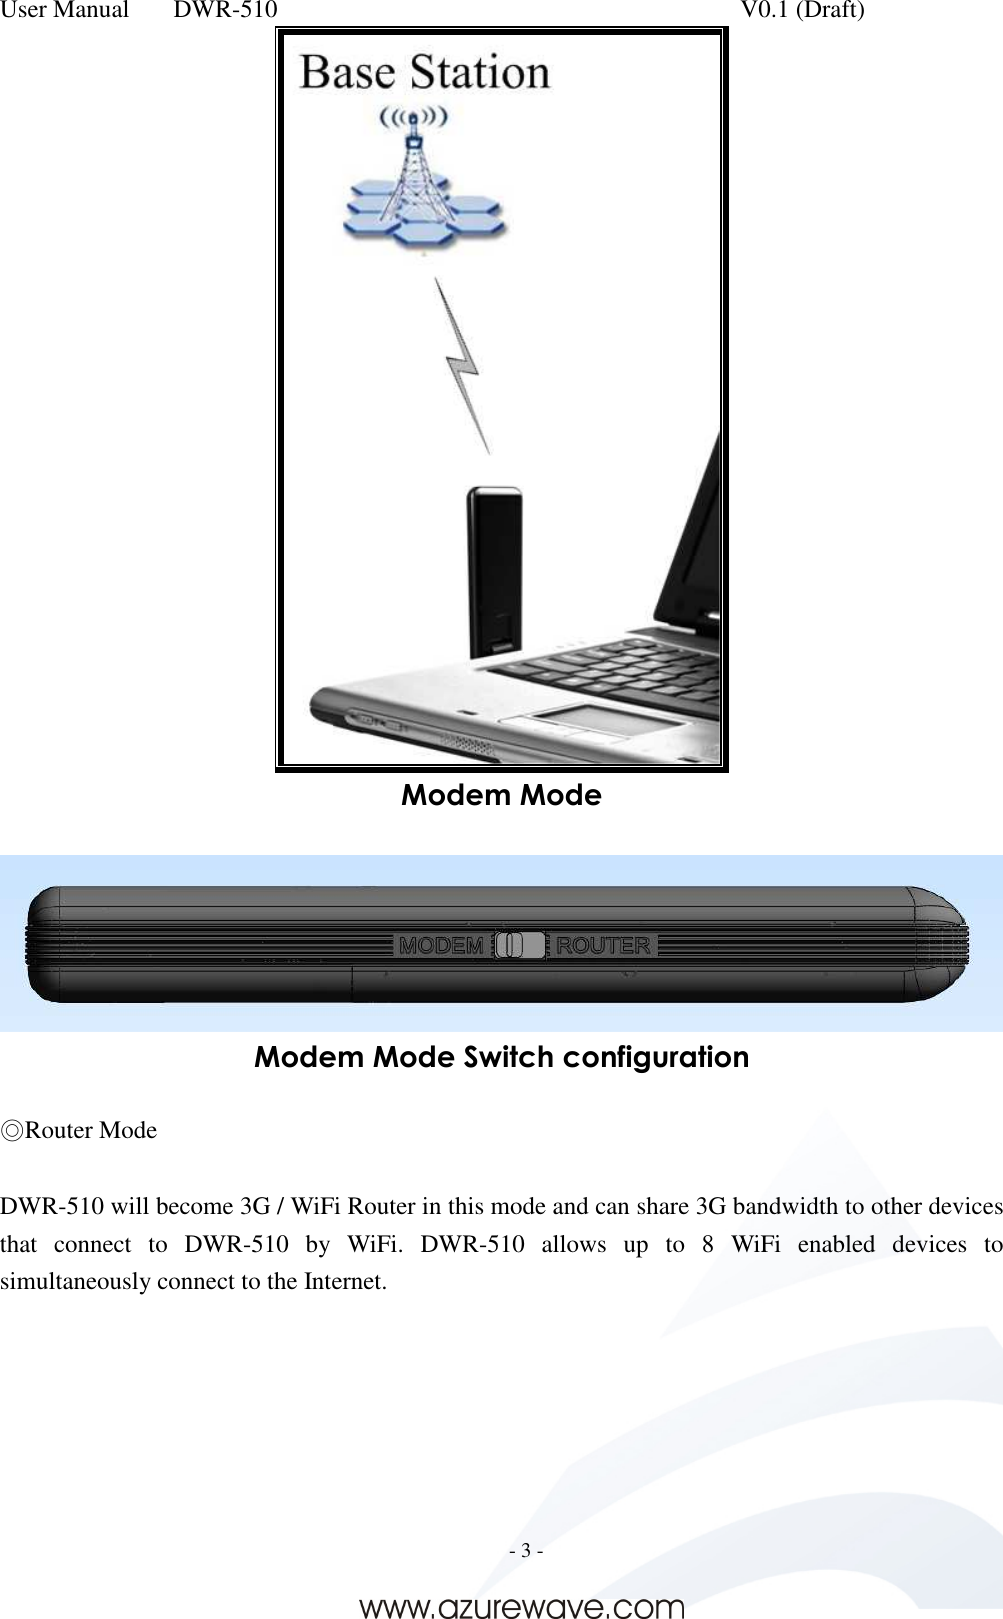 User Manual    DWR-510    V0.1 (Draft)     - 3 -   Modem Mode   Modem Mode Switch configuration  ◎Router Mode  DWR-510 will become 3G / WiFi Router in this mode and can share 3G bandwidth to other devices that  connect  to  DWR-510  by  WiFi.  DWR-510  allows  up  to  8  WiFi  enabled  devices  to simultaneously connect to the Internet.  